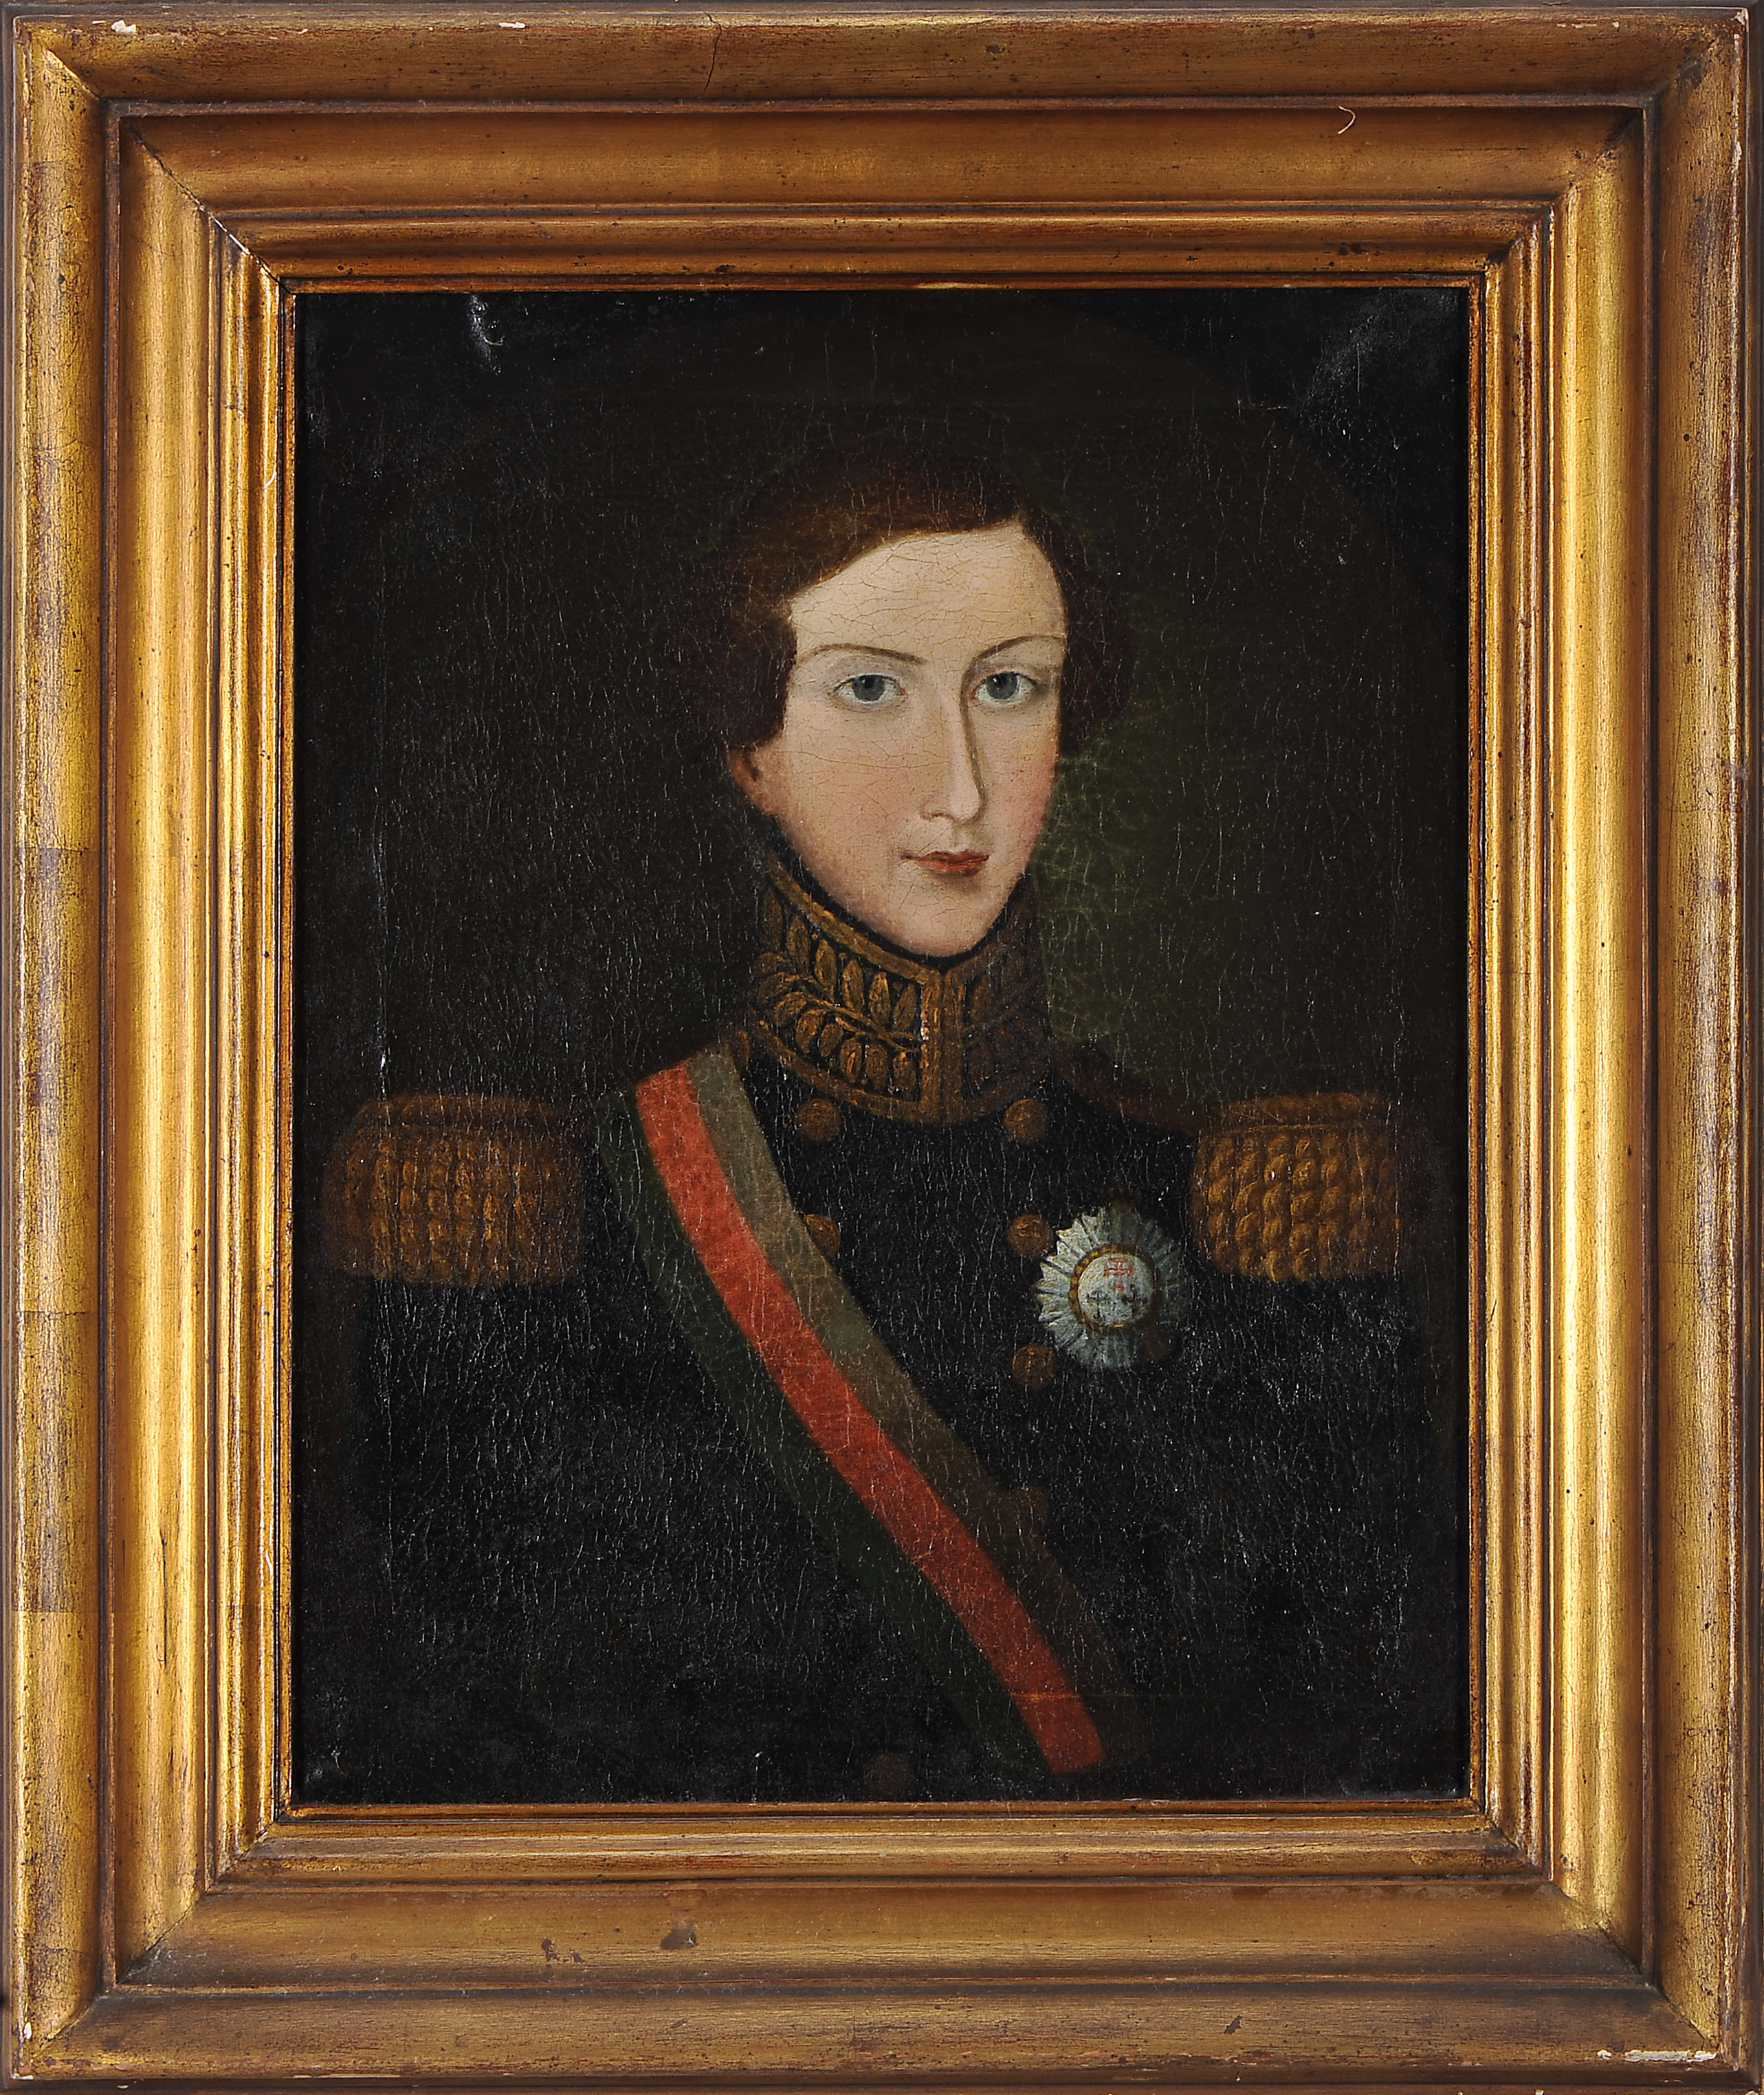 Portrait of King D. Miguel I (1802-1866) of Portugal